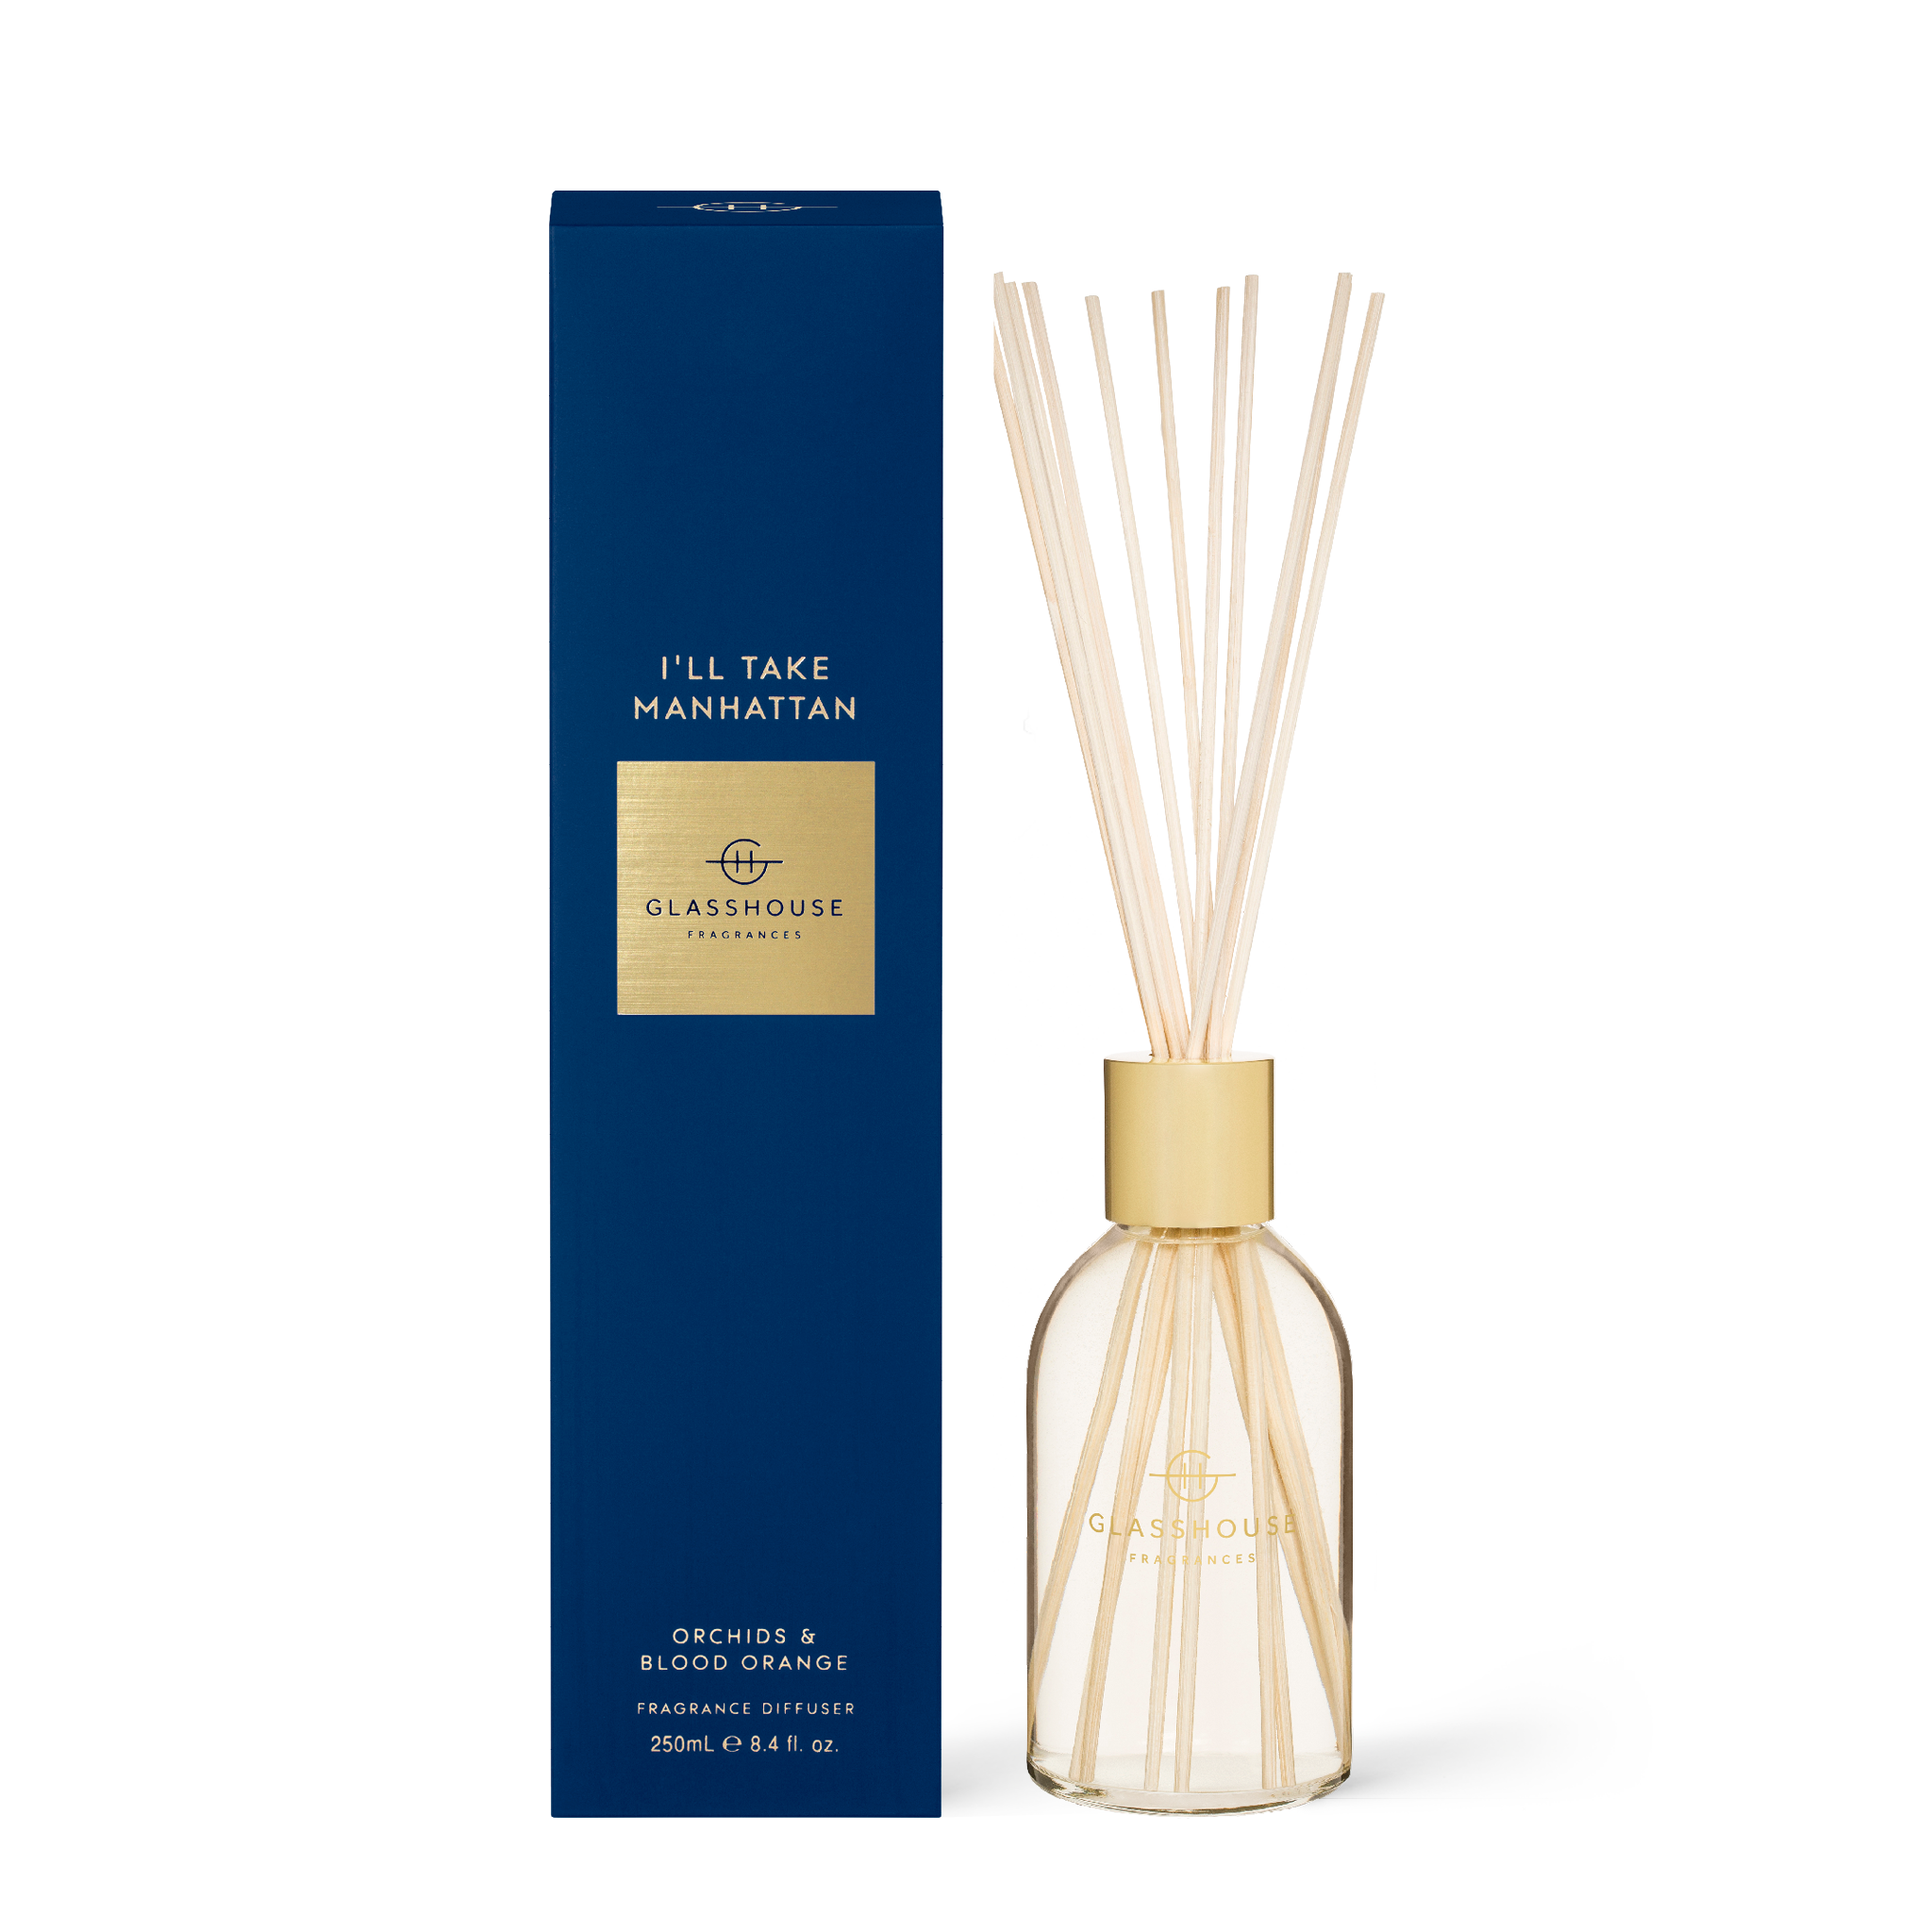 Glasshouse Fragrances I'll Take Manhattan Orchids and Blood Orange 250mL Scent Diffuser with box